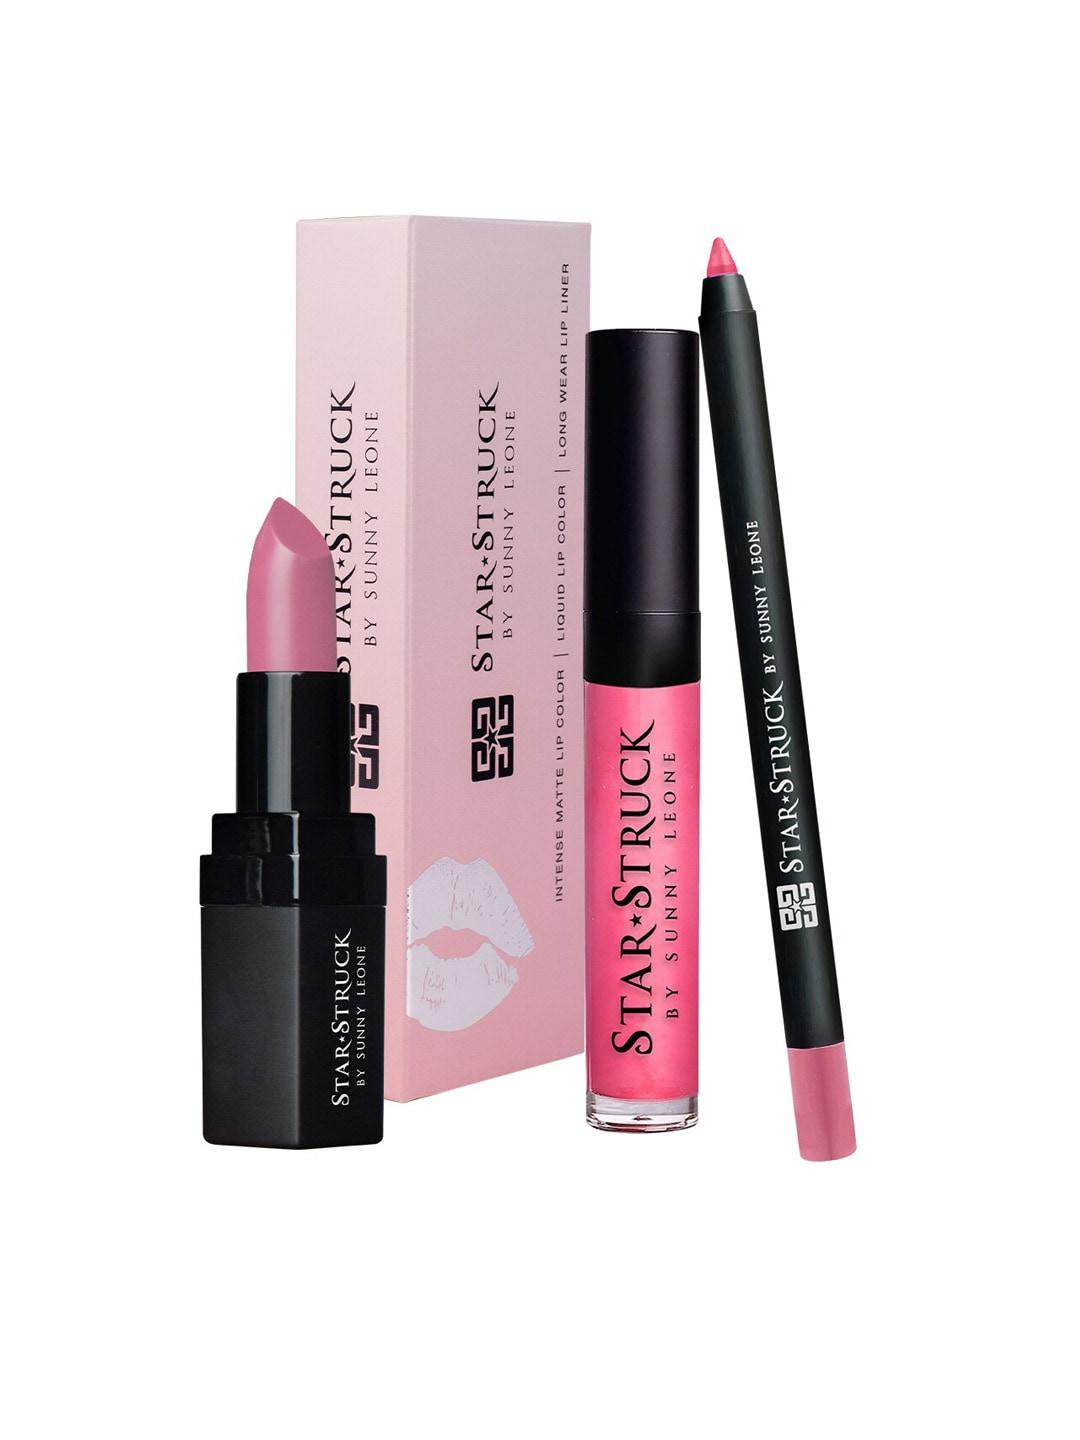 STAR STRUCK BY SUNNY LEONE Set Of 3 Long Lasting Highly Pigmented Lip Kit- Pink Peony